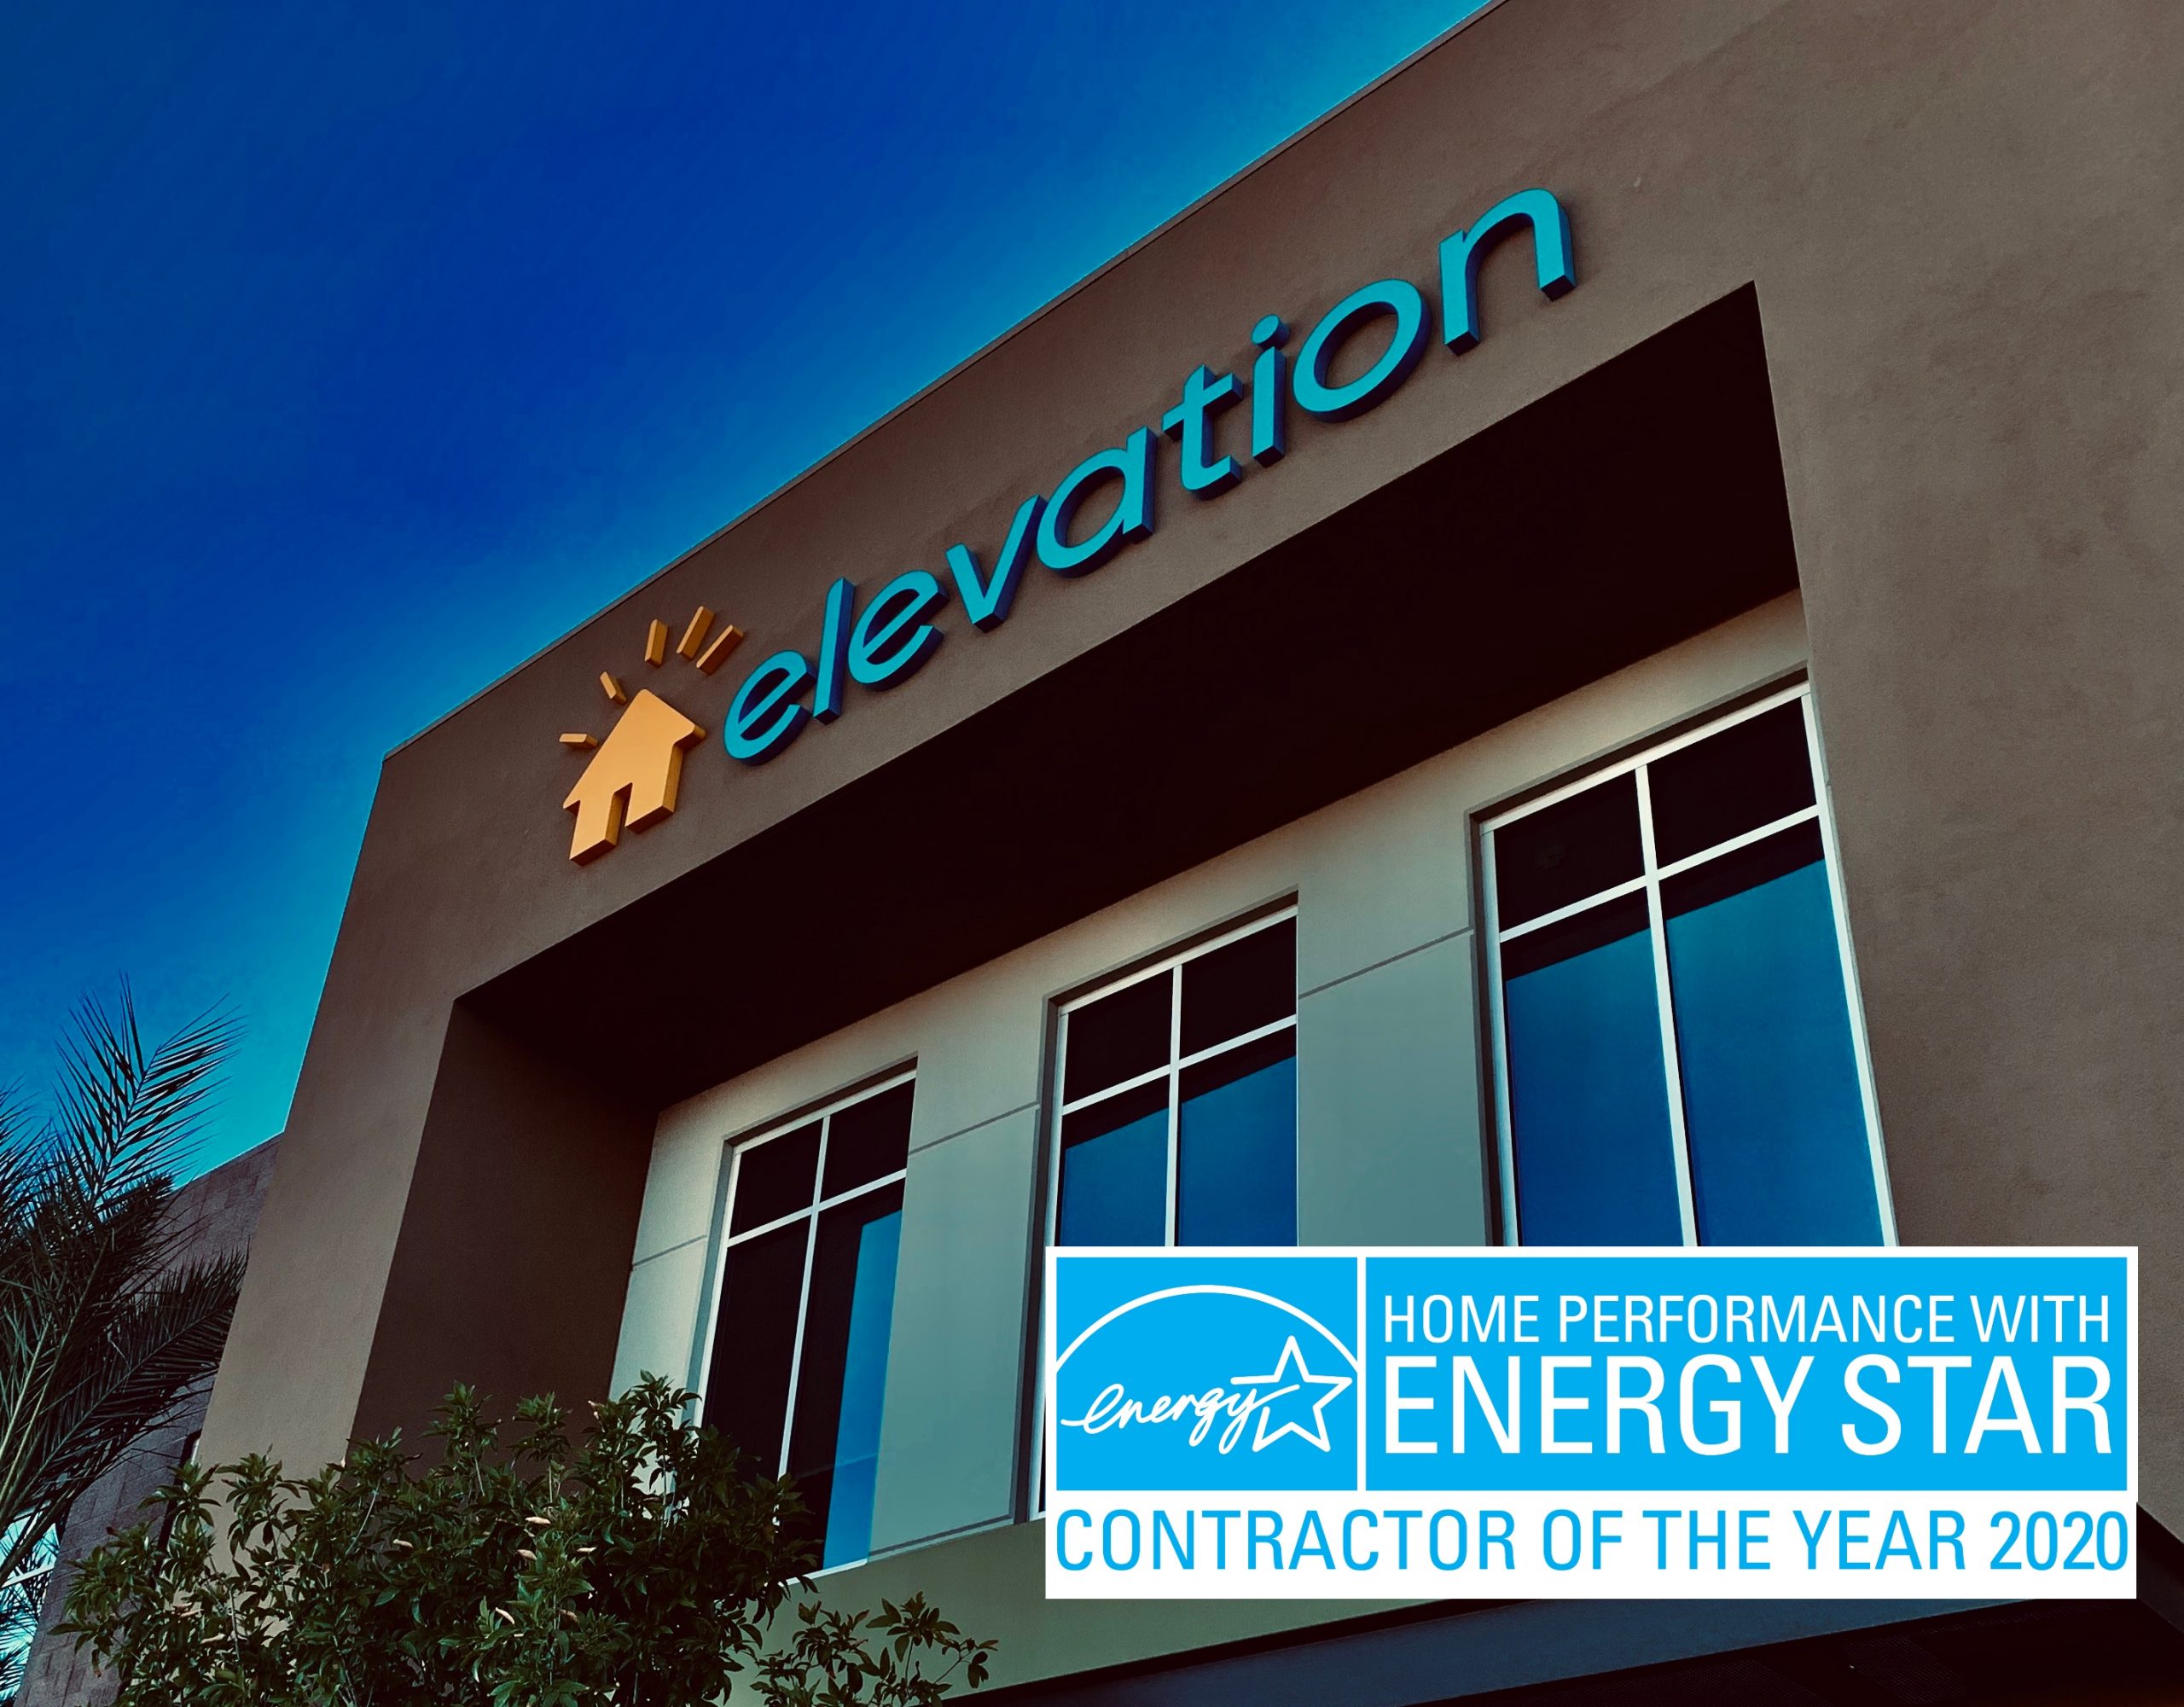 Elevation Home Energy Solutions Named 2020 Contractor of the Year